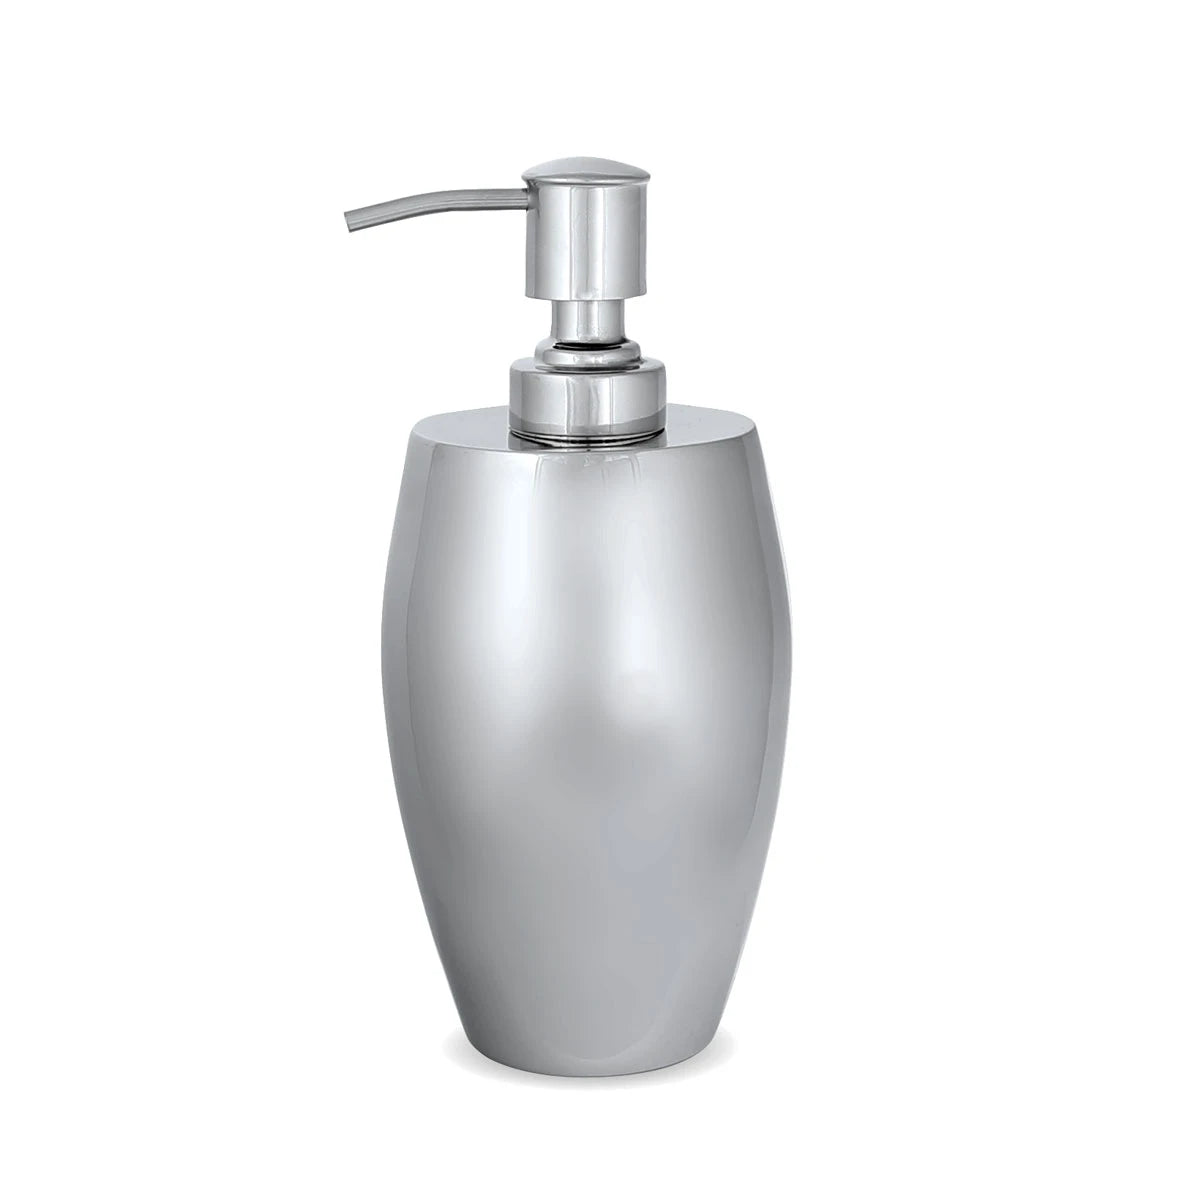 Angled Side View of Lotion Bottle - Silver